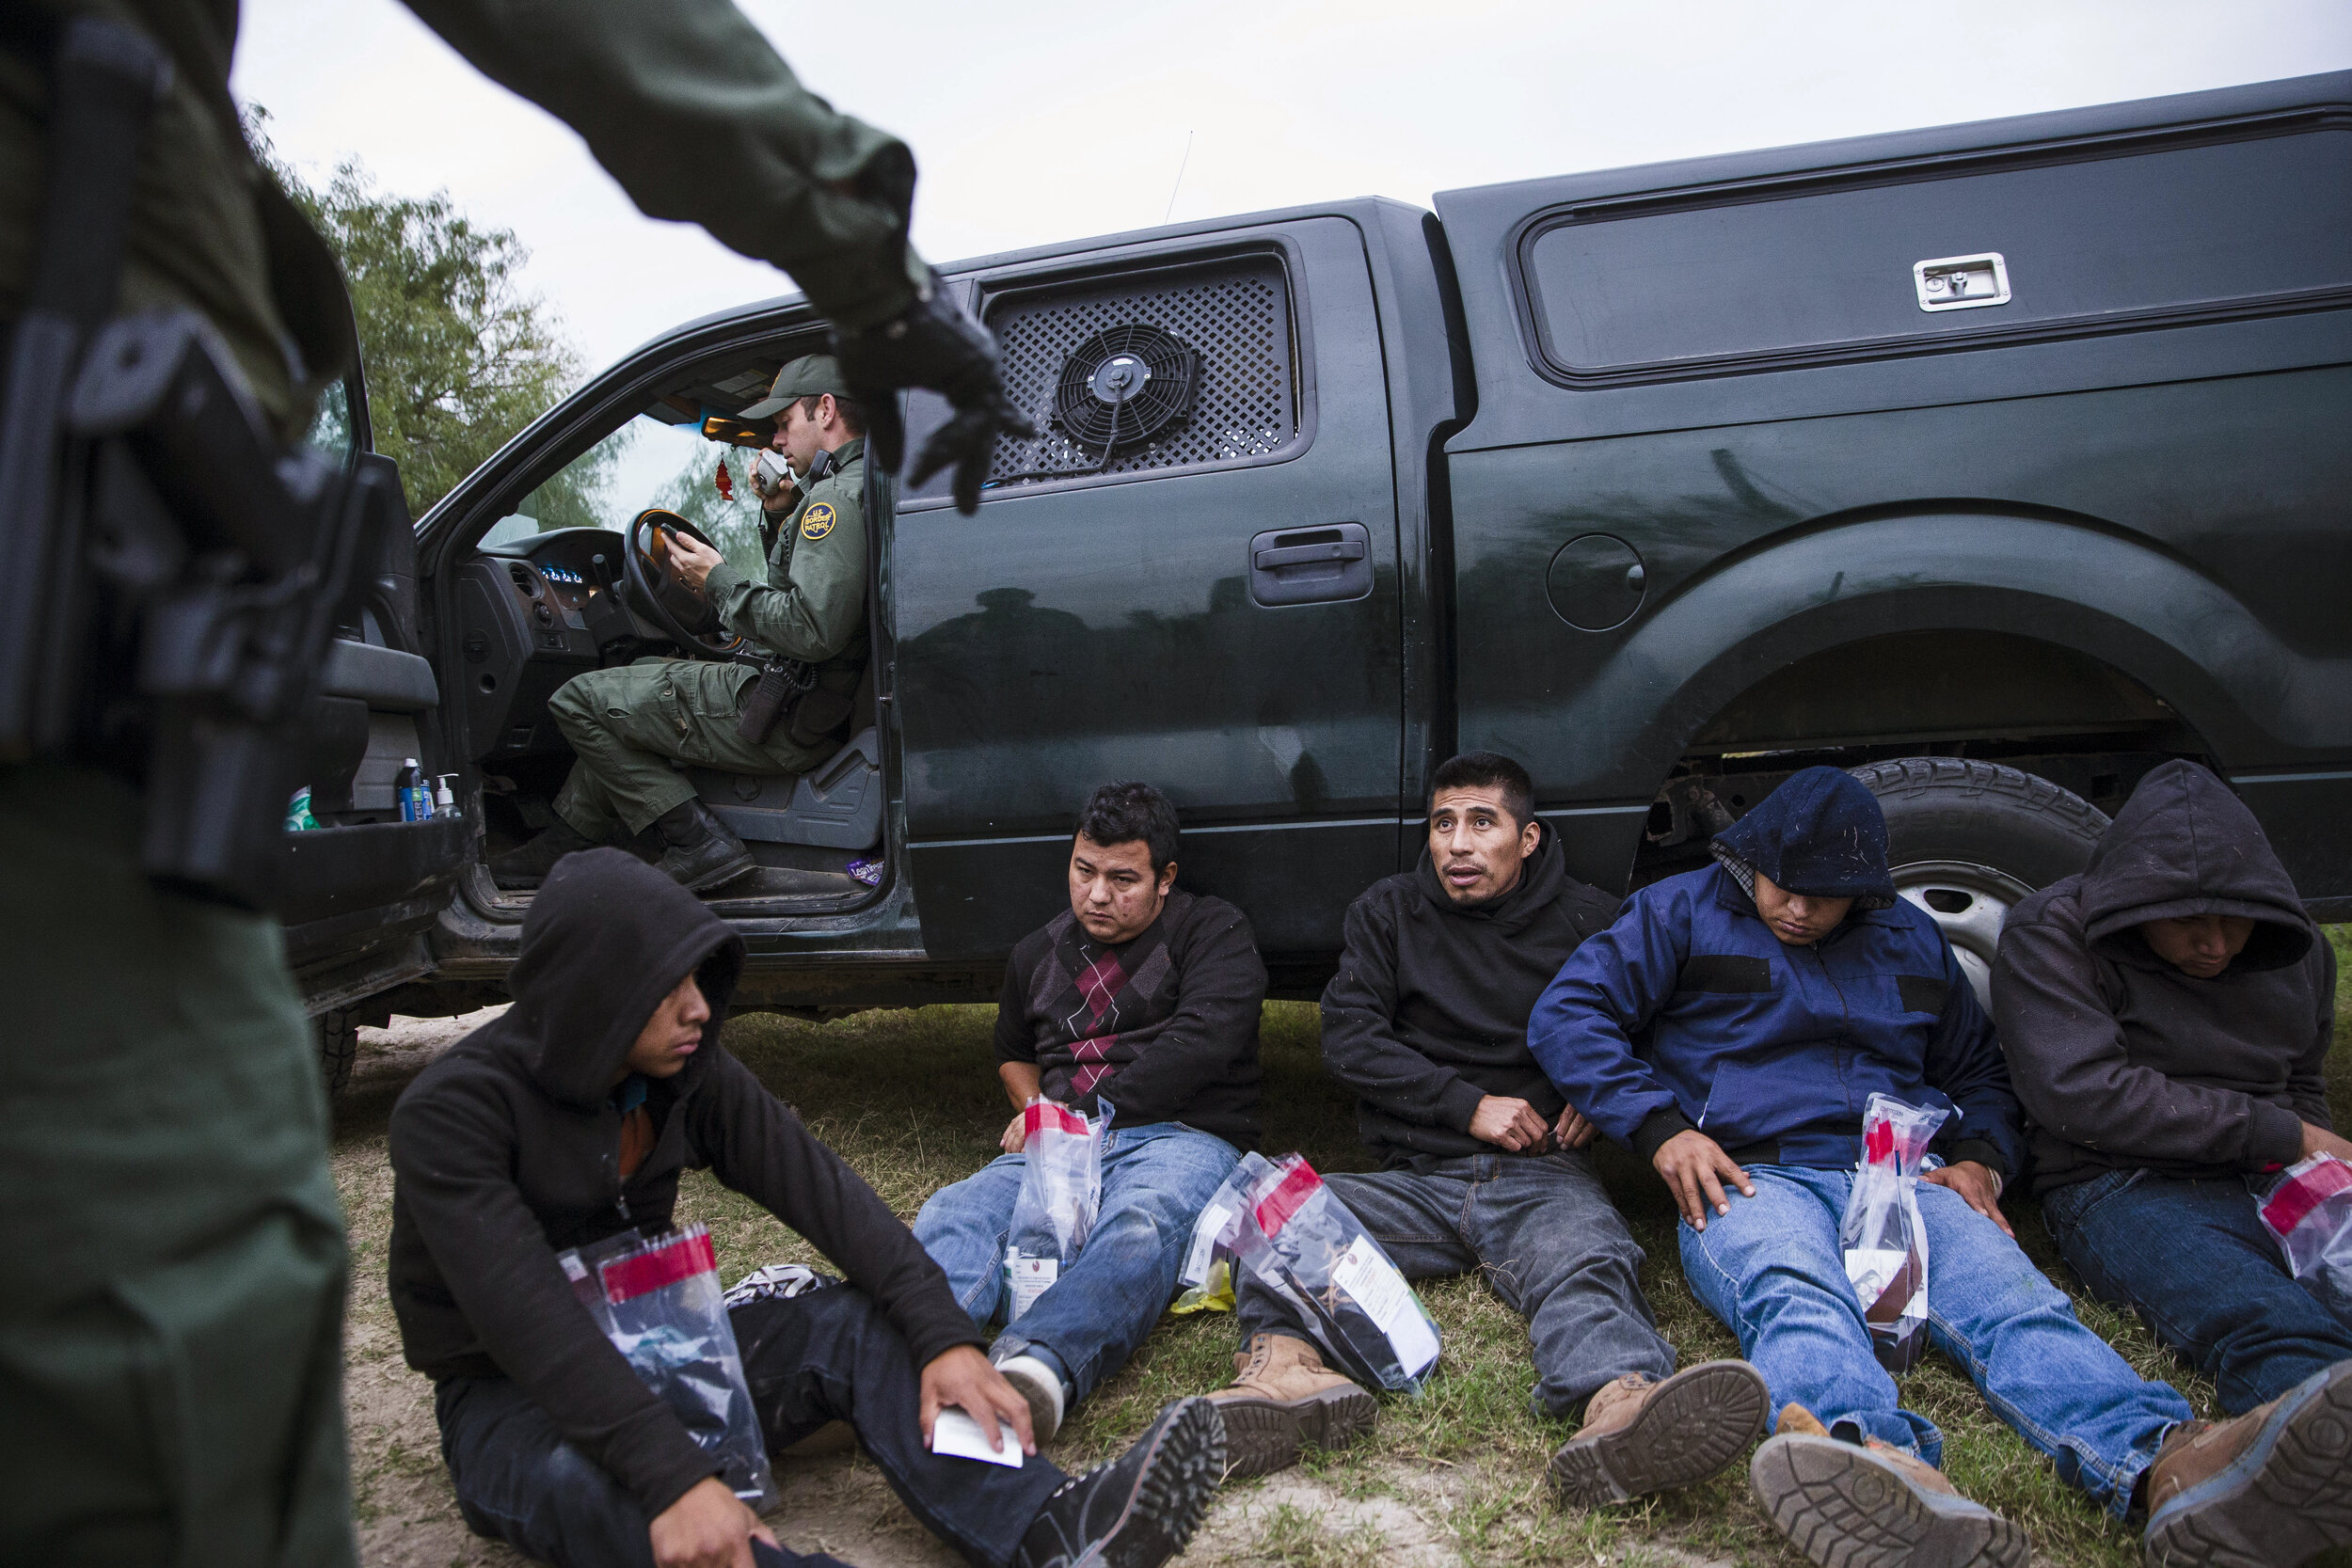  A group of immigrants from Guatemala, Honduras and Mexico are taken into custody by Border Patrol Agents after being apprehended crossing the border from Mexico into the U.S. on Wednesday, Dec. 5, 2018, near McAllen, TX. 